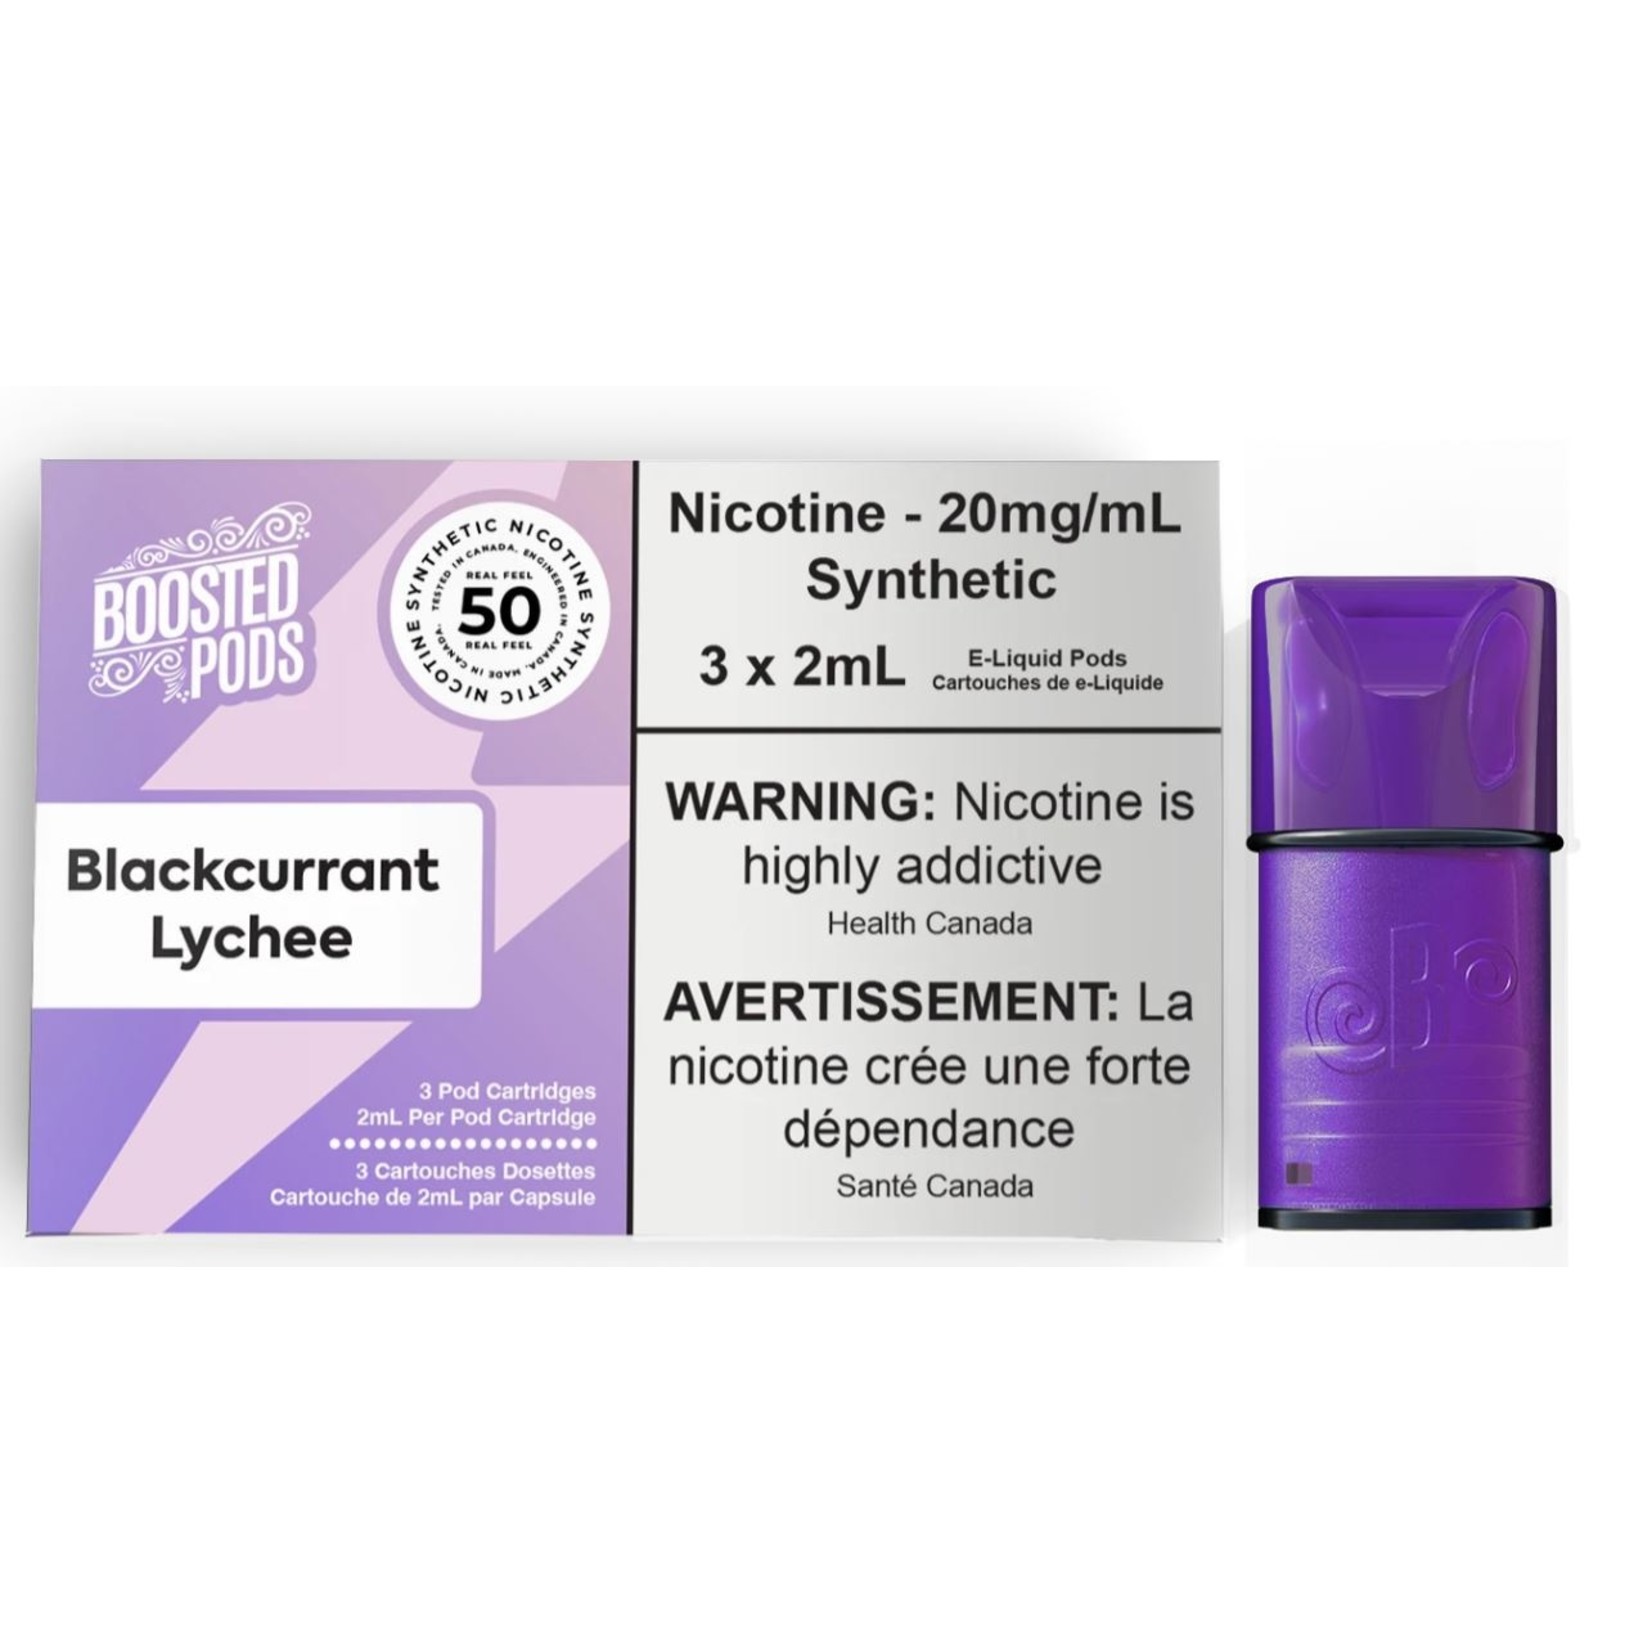 Boosted Pods Blackcurrant Lychee